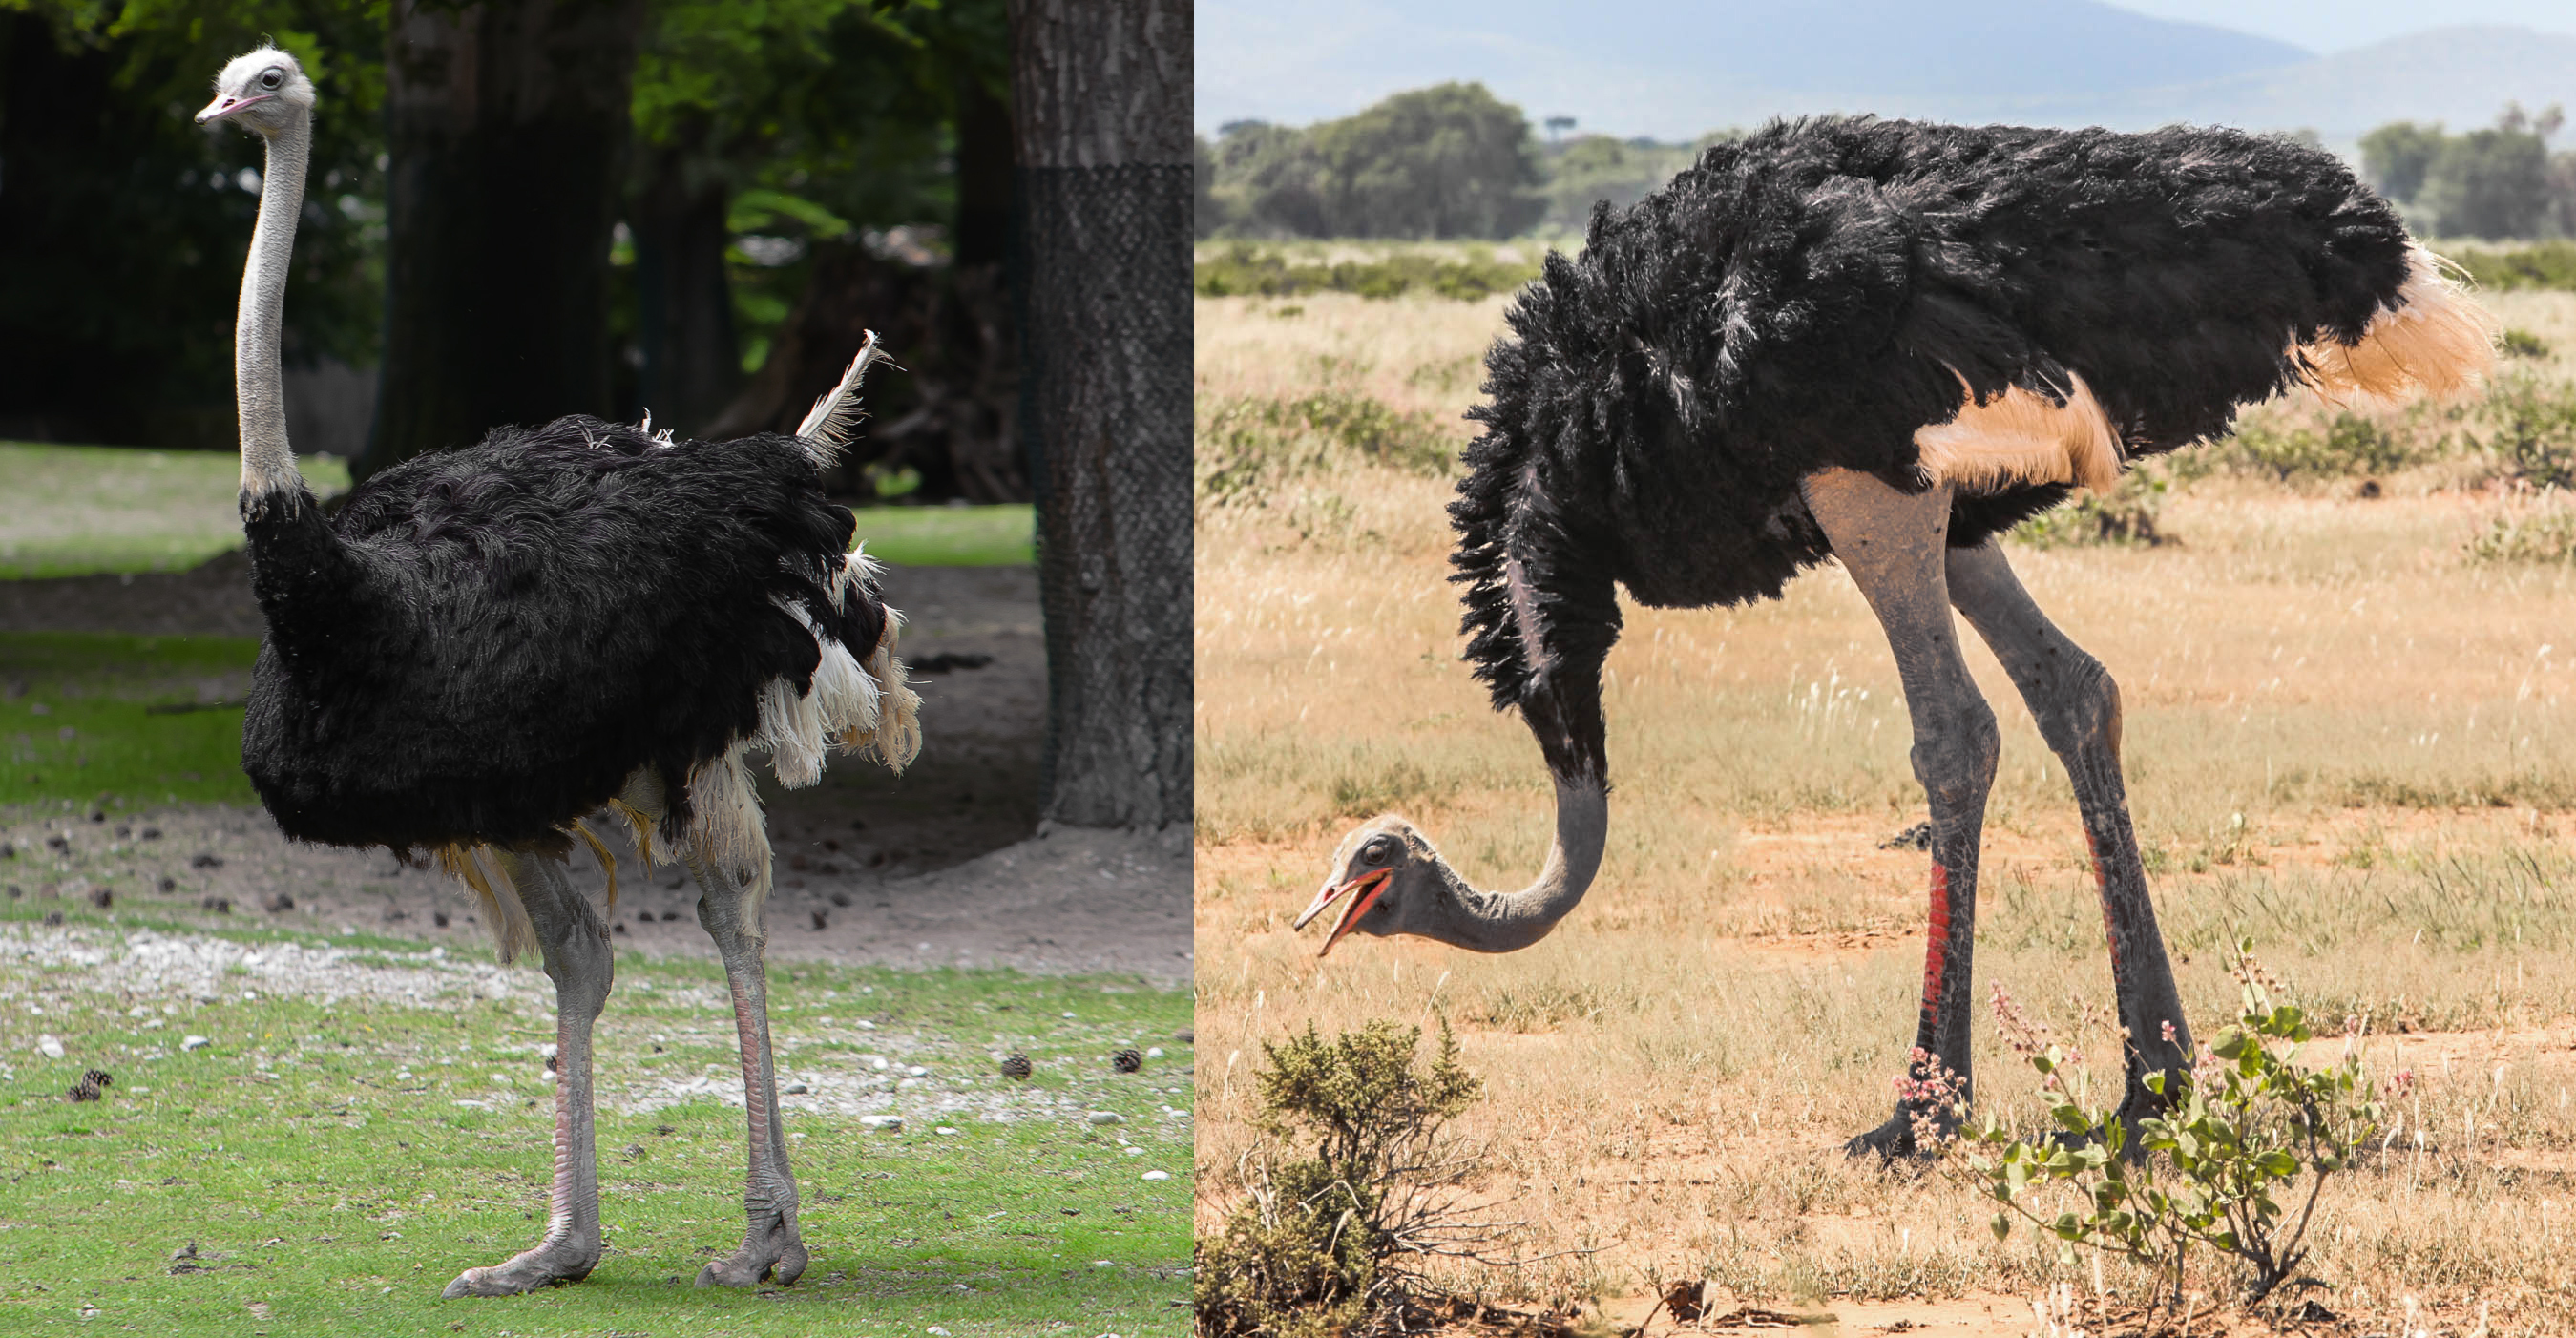 Why is ostrich considered a bird?